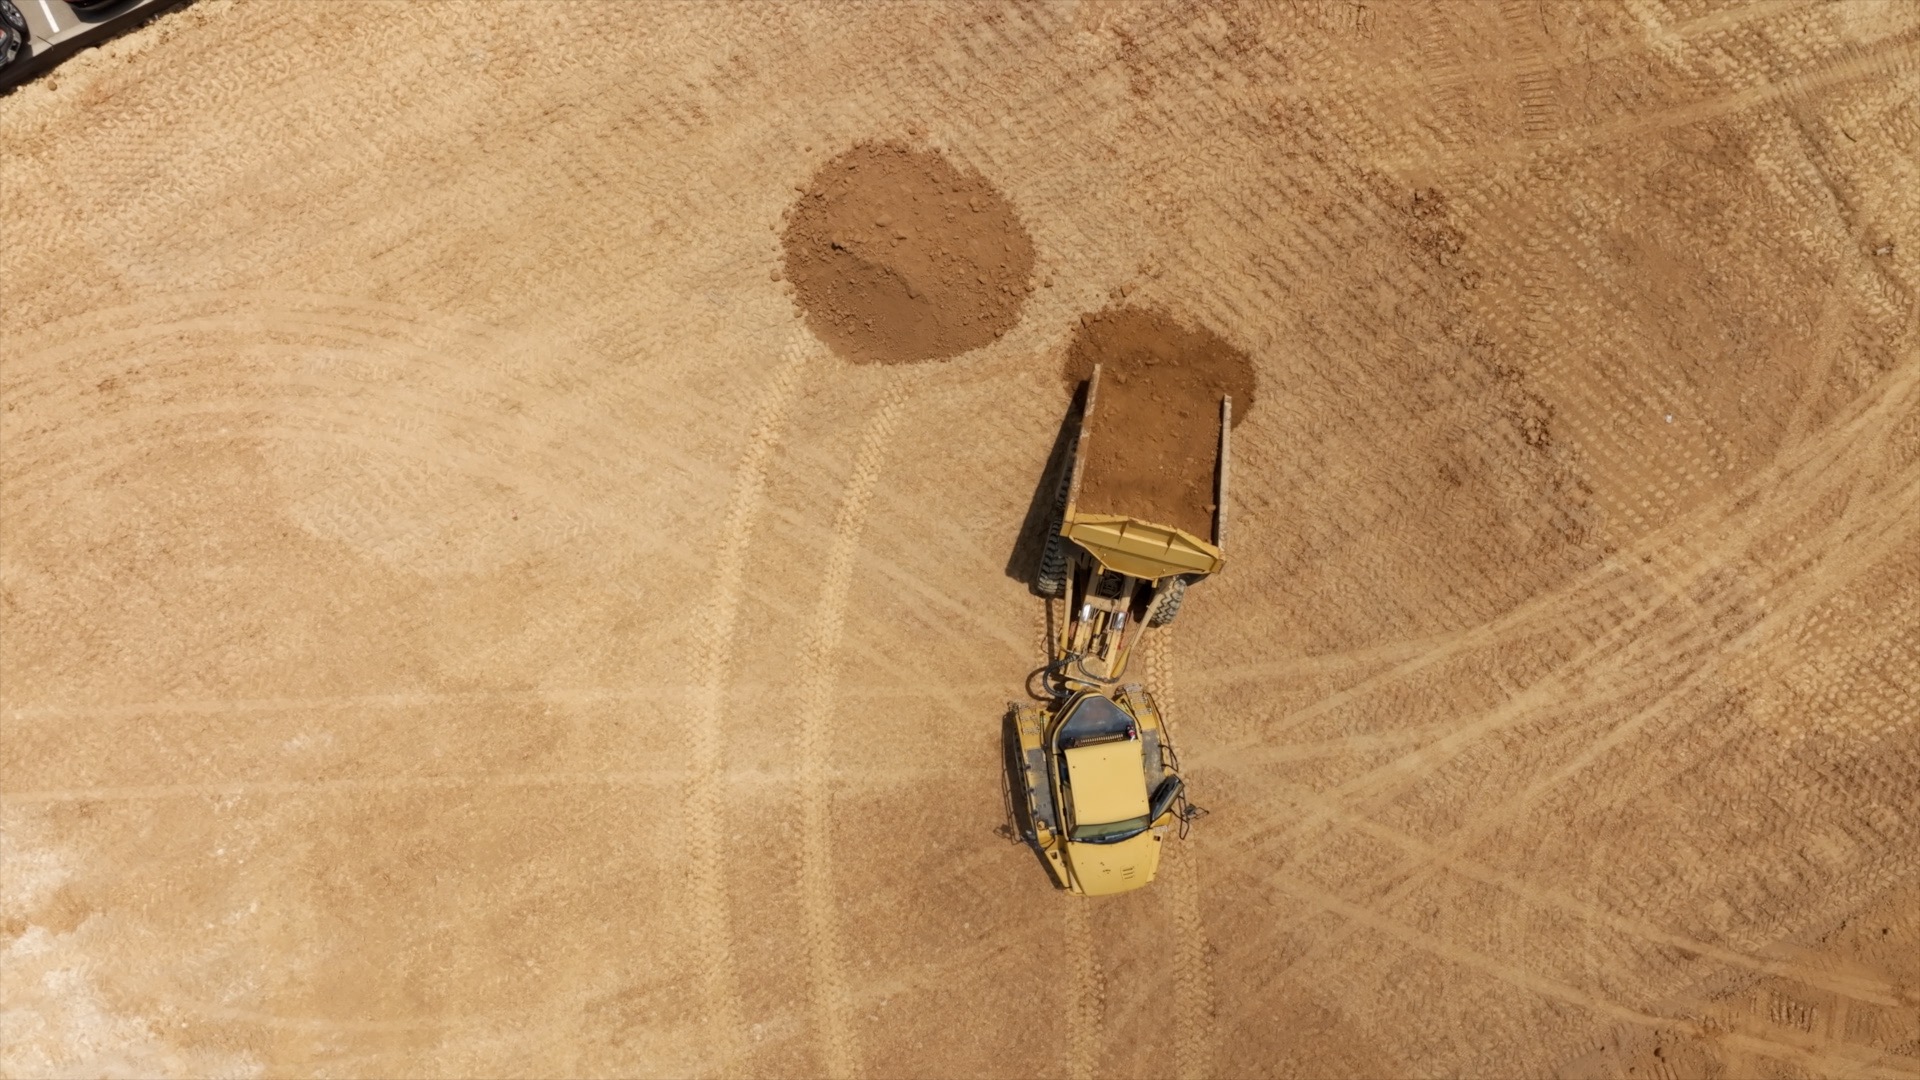 Apricot colored dirt being moved by a yellow bulldozer.